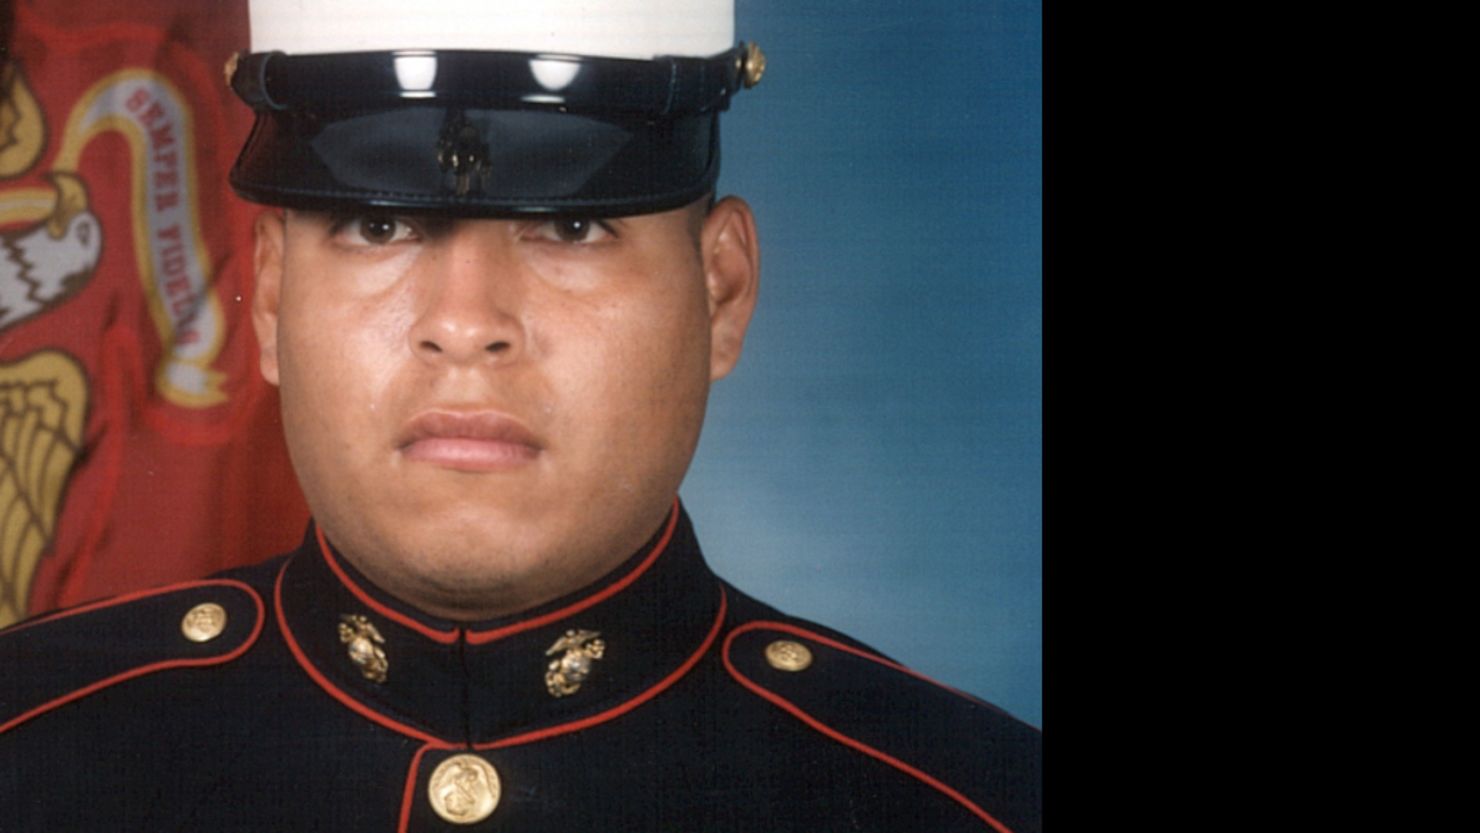 Marines in Sgt. Rafael Peralta's unit said they saw him pick up a grenade and hold it to his body.